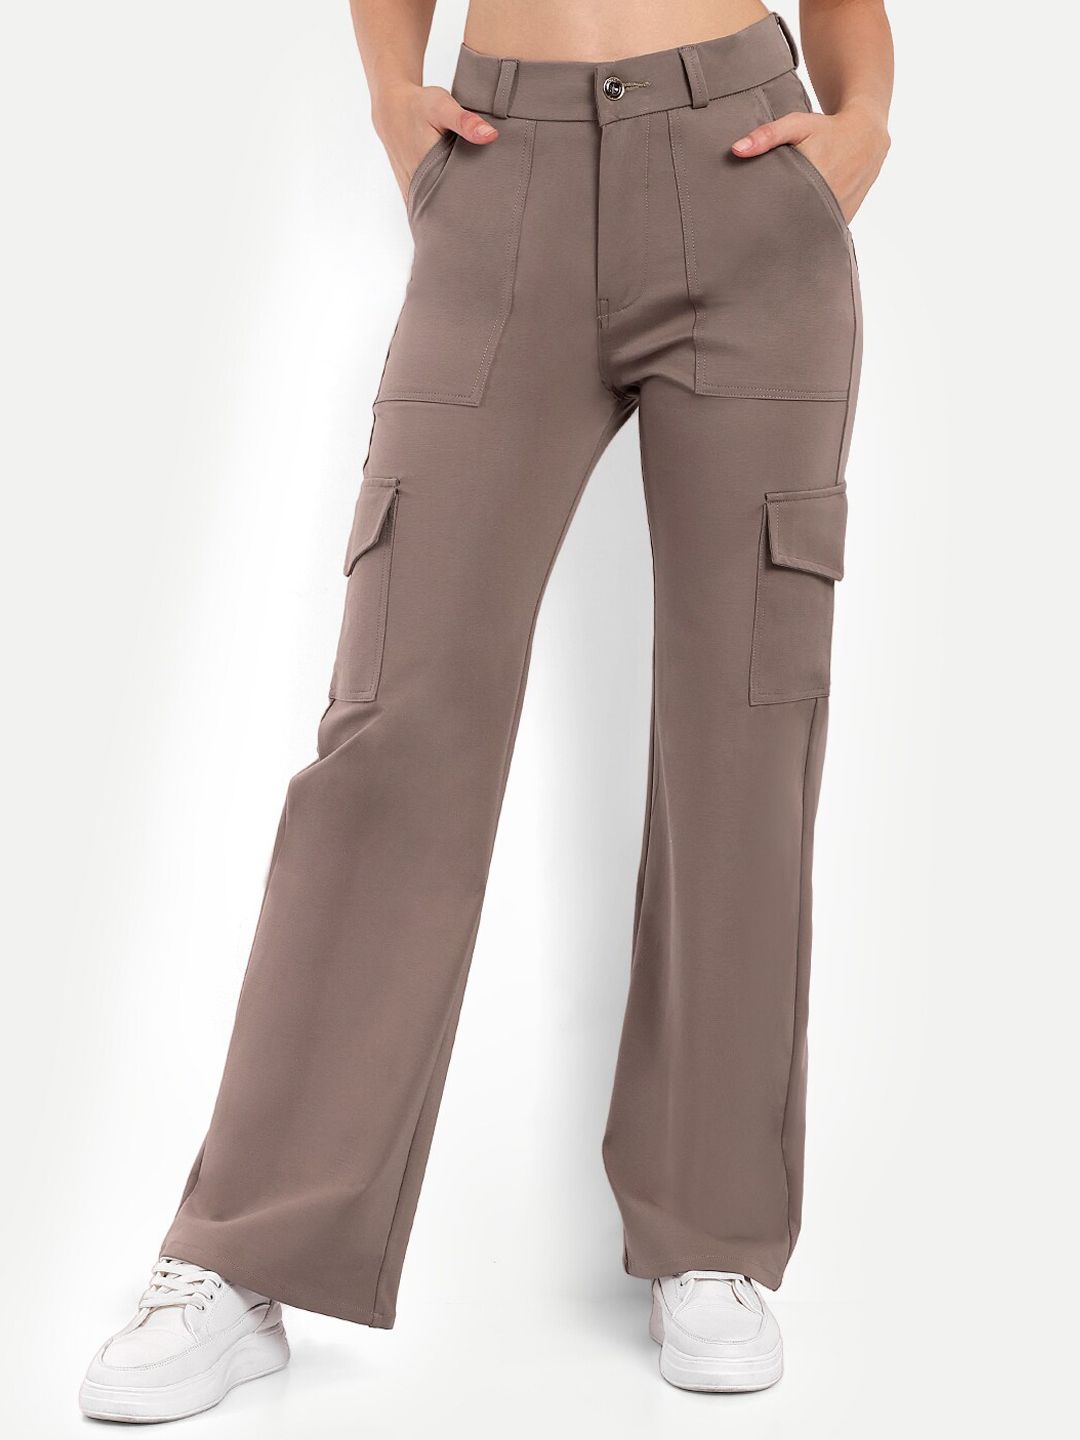 Next One Women Relaxed Straight Fit High-Rise Easy Wash Cargos Price in India